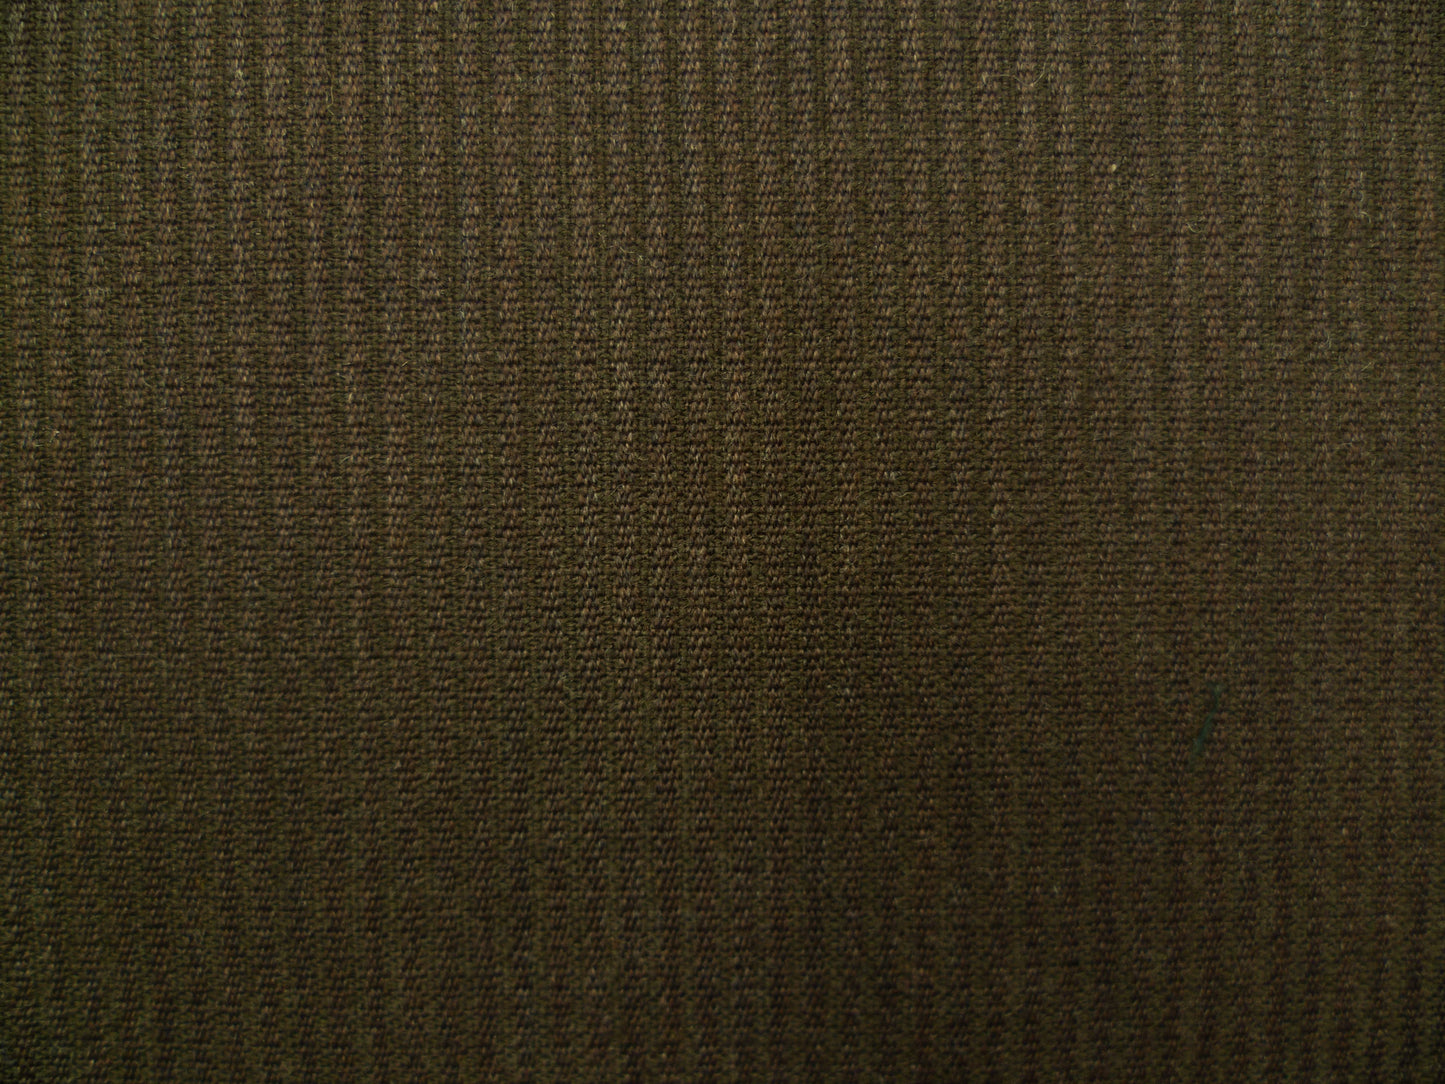 100%  Wool Worsted 10-11 oz